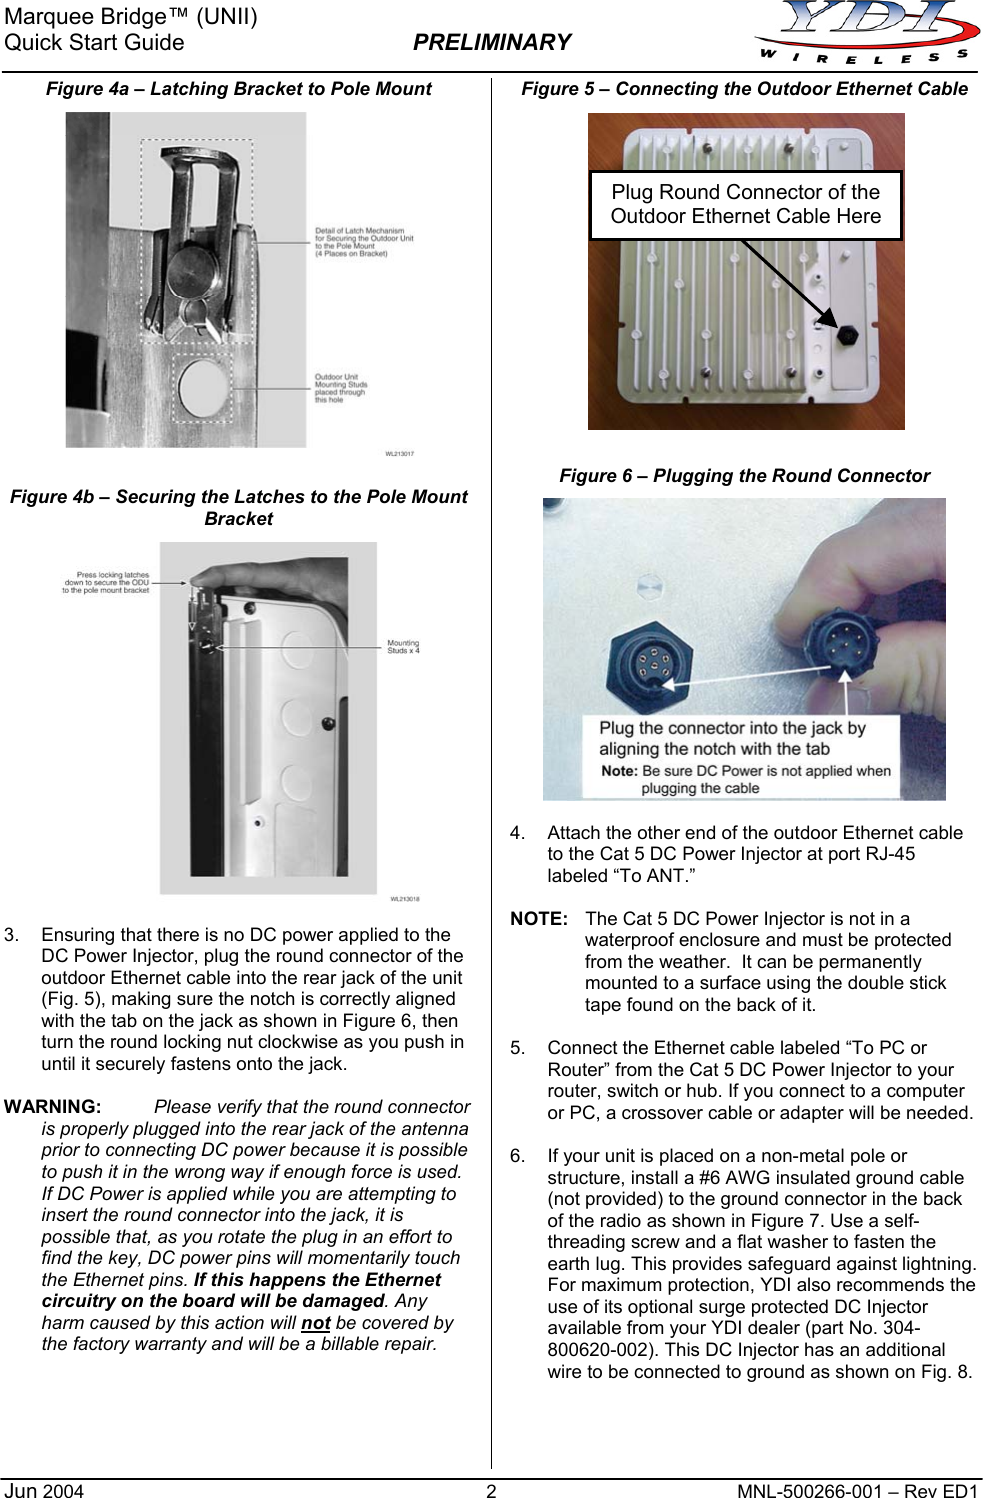 Marquee Bridge™ (UNII) Quick Start Guide  PRELIMINARY   2  MNL-500266-001 – Rev ED1 Figure 4a – Latching Bracket to Pole Mount  Figure 4b – Securing the Latches to the Pole Mount Bracket   3.  Ensuring that there is no DC power applied to the DC Power Injector, plug the round connector of the outdoor Ethernet cable into the rear jack of the unit (Fig. 5), making sure the notch is correctly aligned with the tab on the jack as shown in Figure 6, then turn the round locking nut clockwise as you push in until it securely fastens onto the jack.  WARNING: Please verify that the round connector is properly plugged into the rear jack of the antenna prior to connecting DC power because it is possible to push it in the wrong way if enough force is used. If DC Power is applied while you are attempting to insert the round connector into the jack, it is possible that, as you rotate the plug in an effort to find the key, DC power pins will momentarily touch the Ethernet pins. If this happens the Ethernet circuitry on the board will be damaged. Any harm caused by this action will not be covered by the factory warranty and will be a billable repair.     Figure 5 – Connecting the Outdoor Ethernet Cable                Plug Round Connector of the Outdoor Ethernet Cable HereFigure 6 – Plugging the Round Connector   4.  Attach the other end of the outdoor Ethernet cable to the Cat 5 DC Power Injector at port RJ-45 labeled “To ANT.”  NOTE:  The Cat 5 DC Power Injector is not in a waterproof enclosure and must be protected from the weather.  It can be permanently mounted to a surface using the double stick tape found on the back of it.  5.  Connect the Ethernet cable labeled “To PC or Router” from the Cat 5 DC Power Injector to your router, switch or hub. If you connect to a computer or PC, a crossover cable or adapter will be needed.  6.  If your unit is placed on a non-metal pole or structure, install a #6 AWG insulated ground cable (not provided) to the ground connector in the back of the radio as shown in Figure 7. Use a self-threading screw and a flat washer to fasten the earth lug. This provides safeguard against lightning. For maximum protection, YDI also recommends the use of its optional surge protected DC Injector available from your YDI dealer (part No. 304-800620-002). This DC Injector has an additional wire to be connected to ground as shown on Fig. 8.     Jun 2004